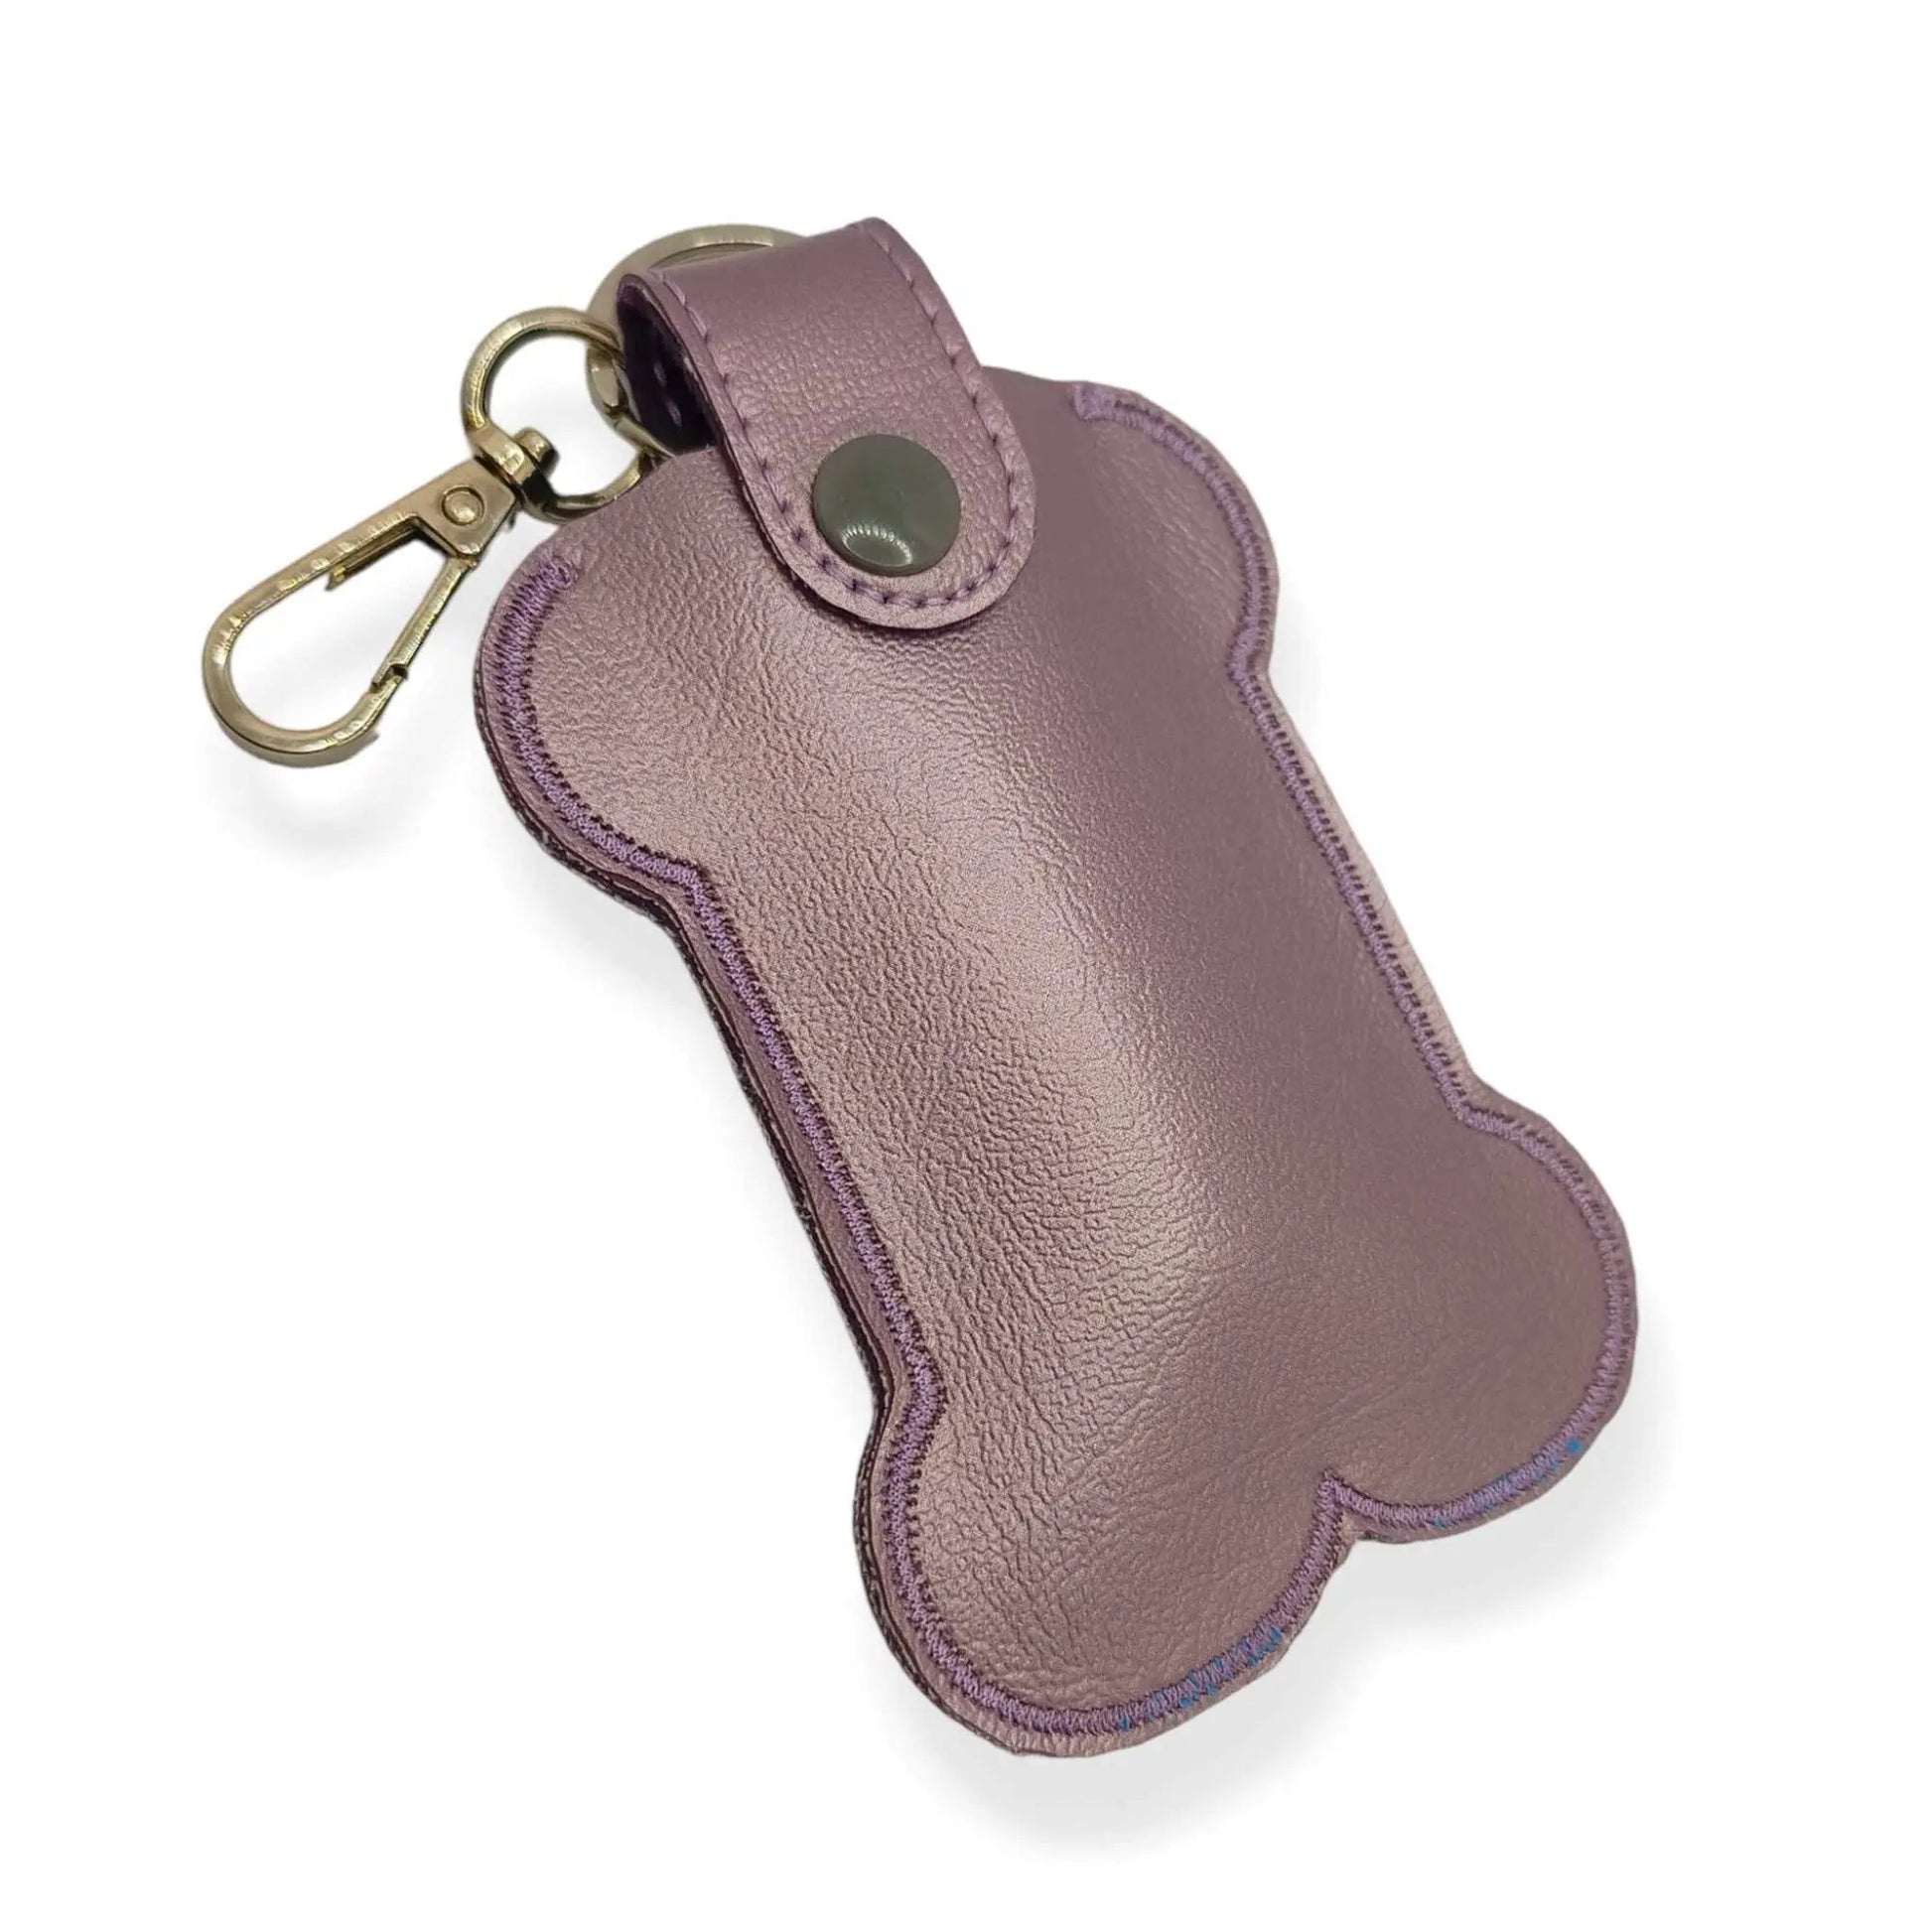 Dog Poop Bag Keychain Holder | Bag Dispenser | The Perfect Accessory for All Dog Owners | Made in Australia